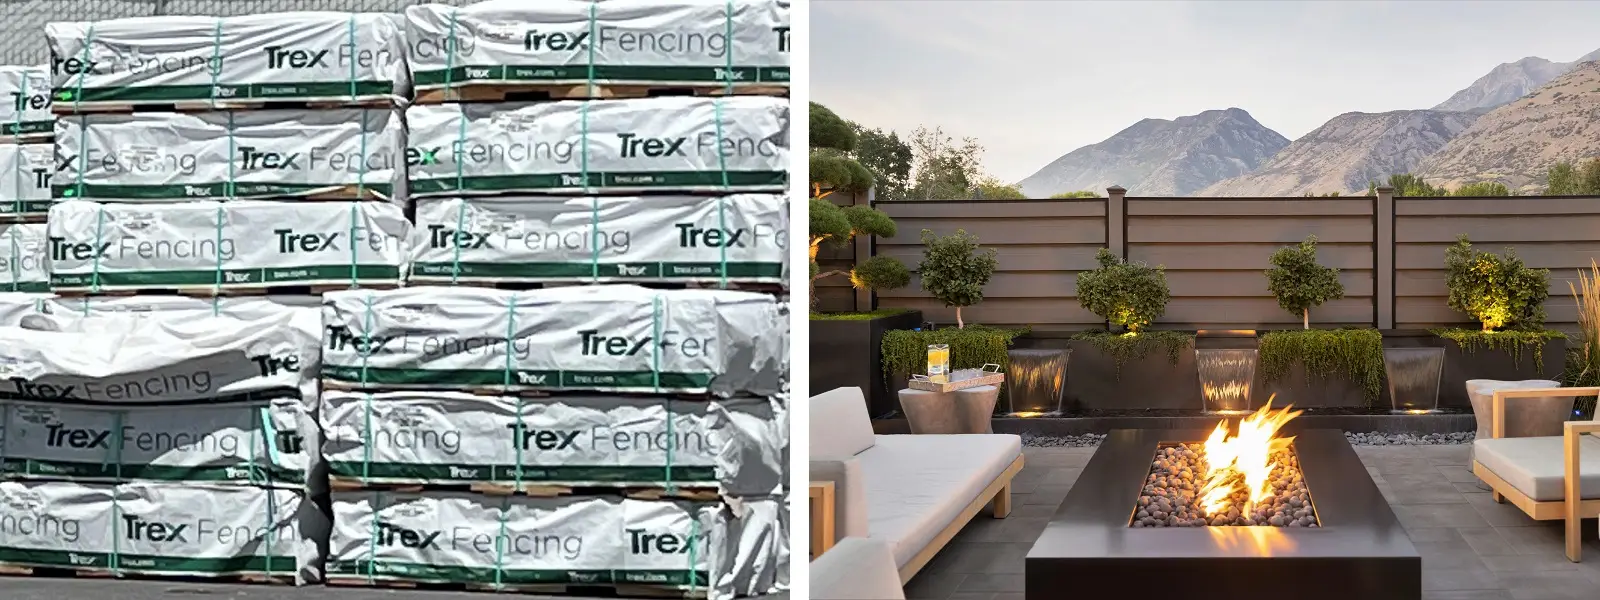 Trex materials and a composite picture of a Horizons horizontal fence system